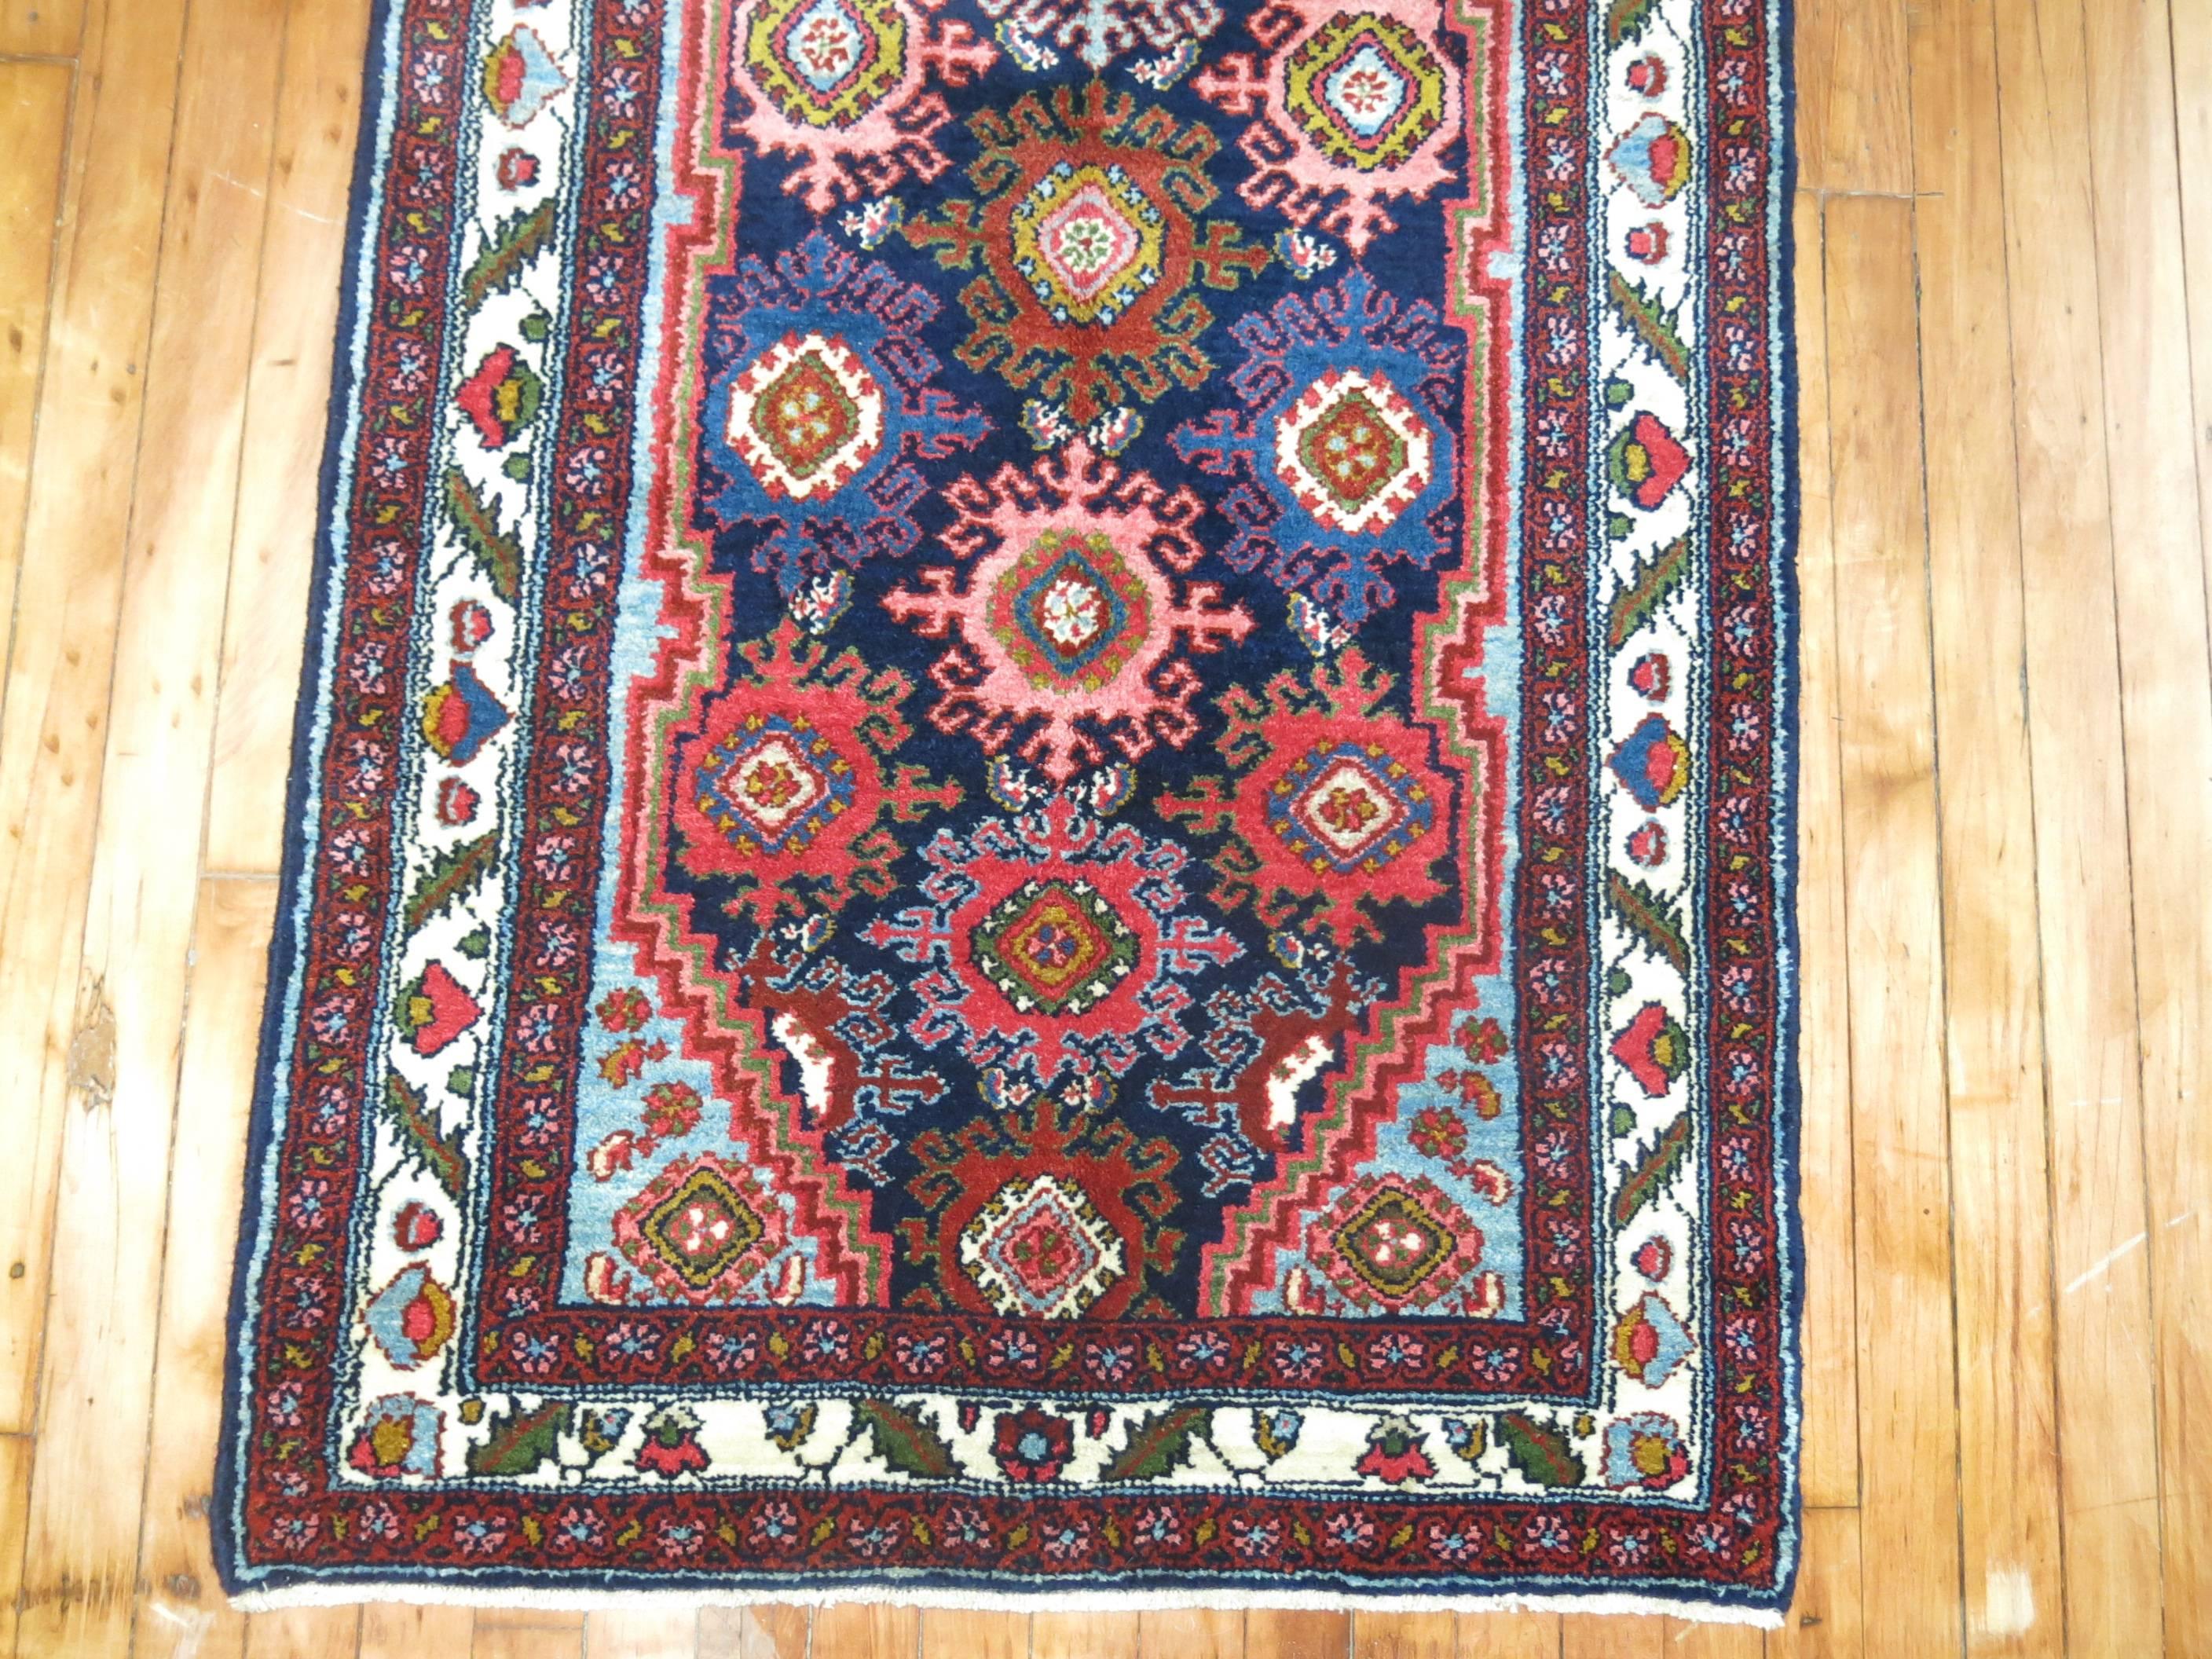 Rare long and narrow Persian Hamadan Runner in jewel tones.

Hamadan is a city situated in the western part of Iran, 300 kms west of Teheran. It is one of the worlds oldest cities and is mentioned under the name of Ekbatana in the Bible, see the